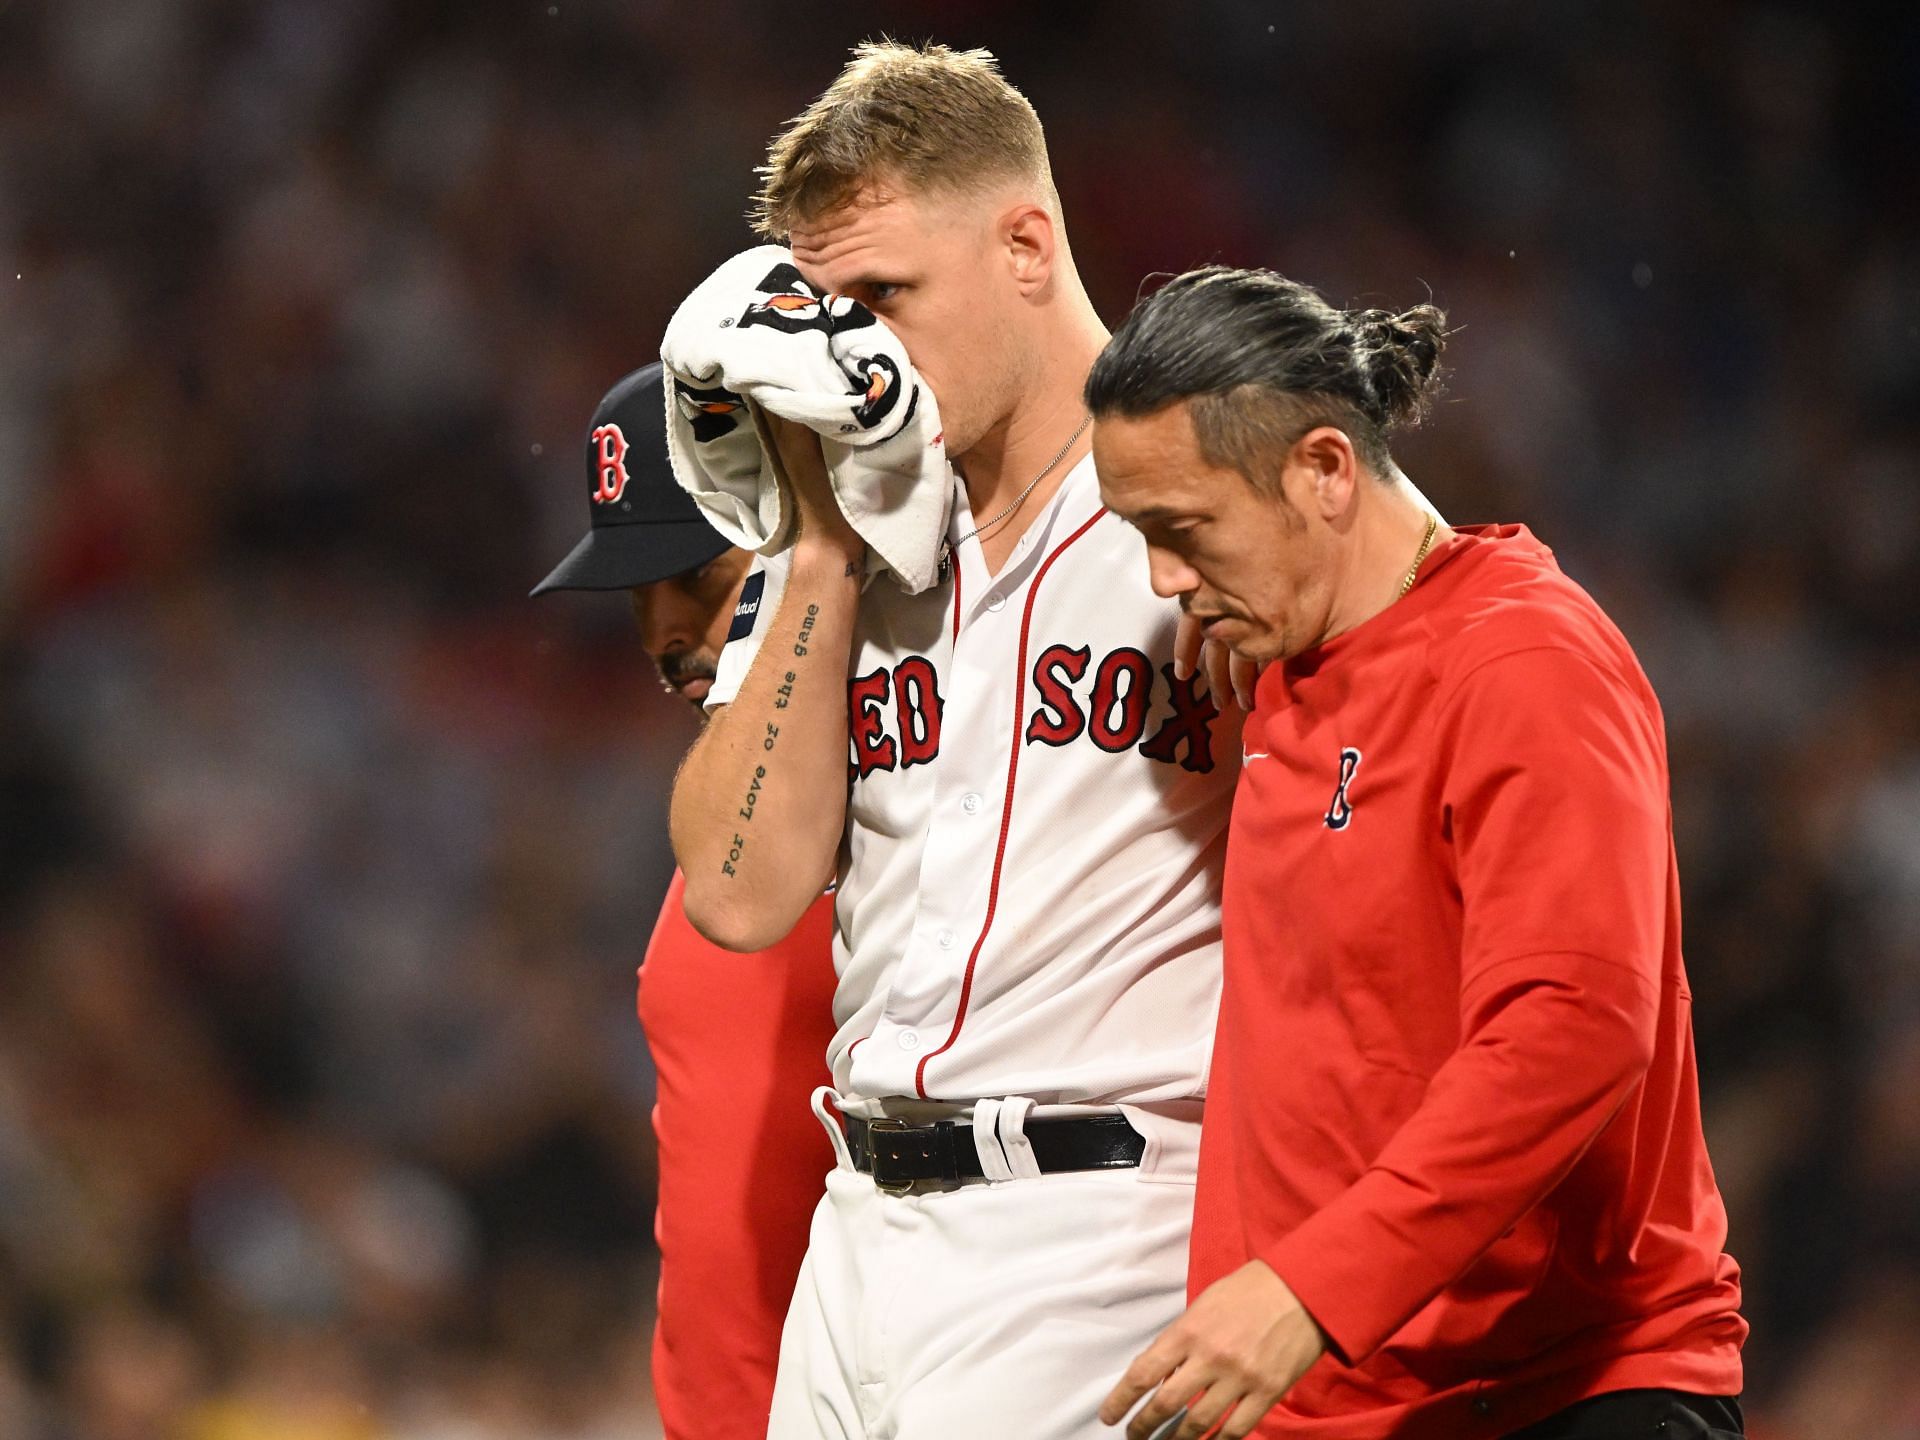 Red Sox shut down Tanner Houck, as the reliever is likely headed